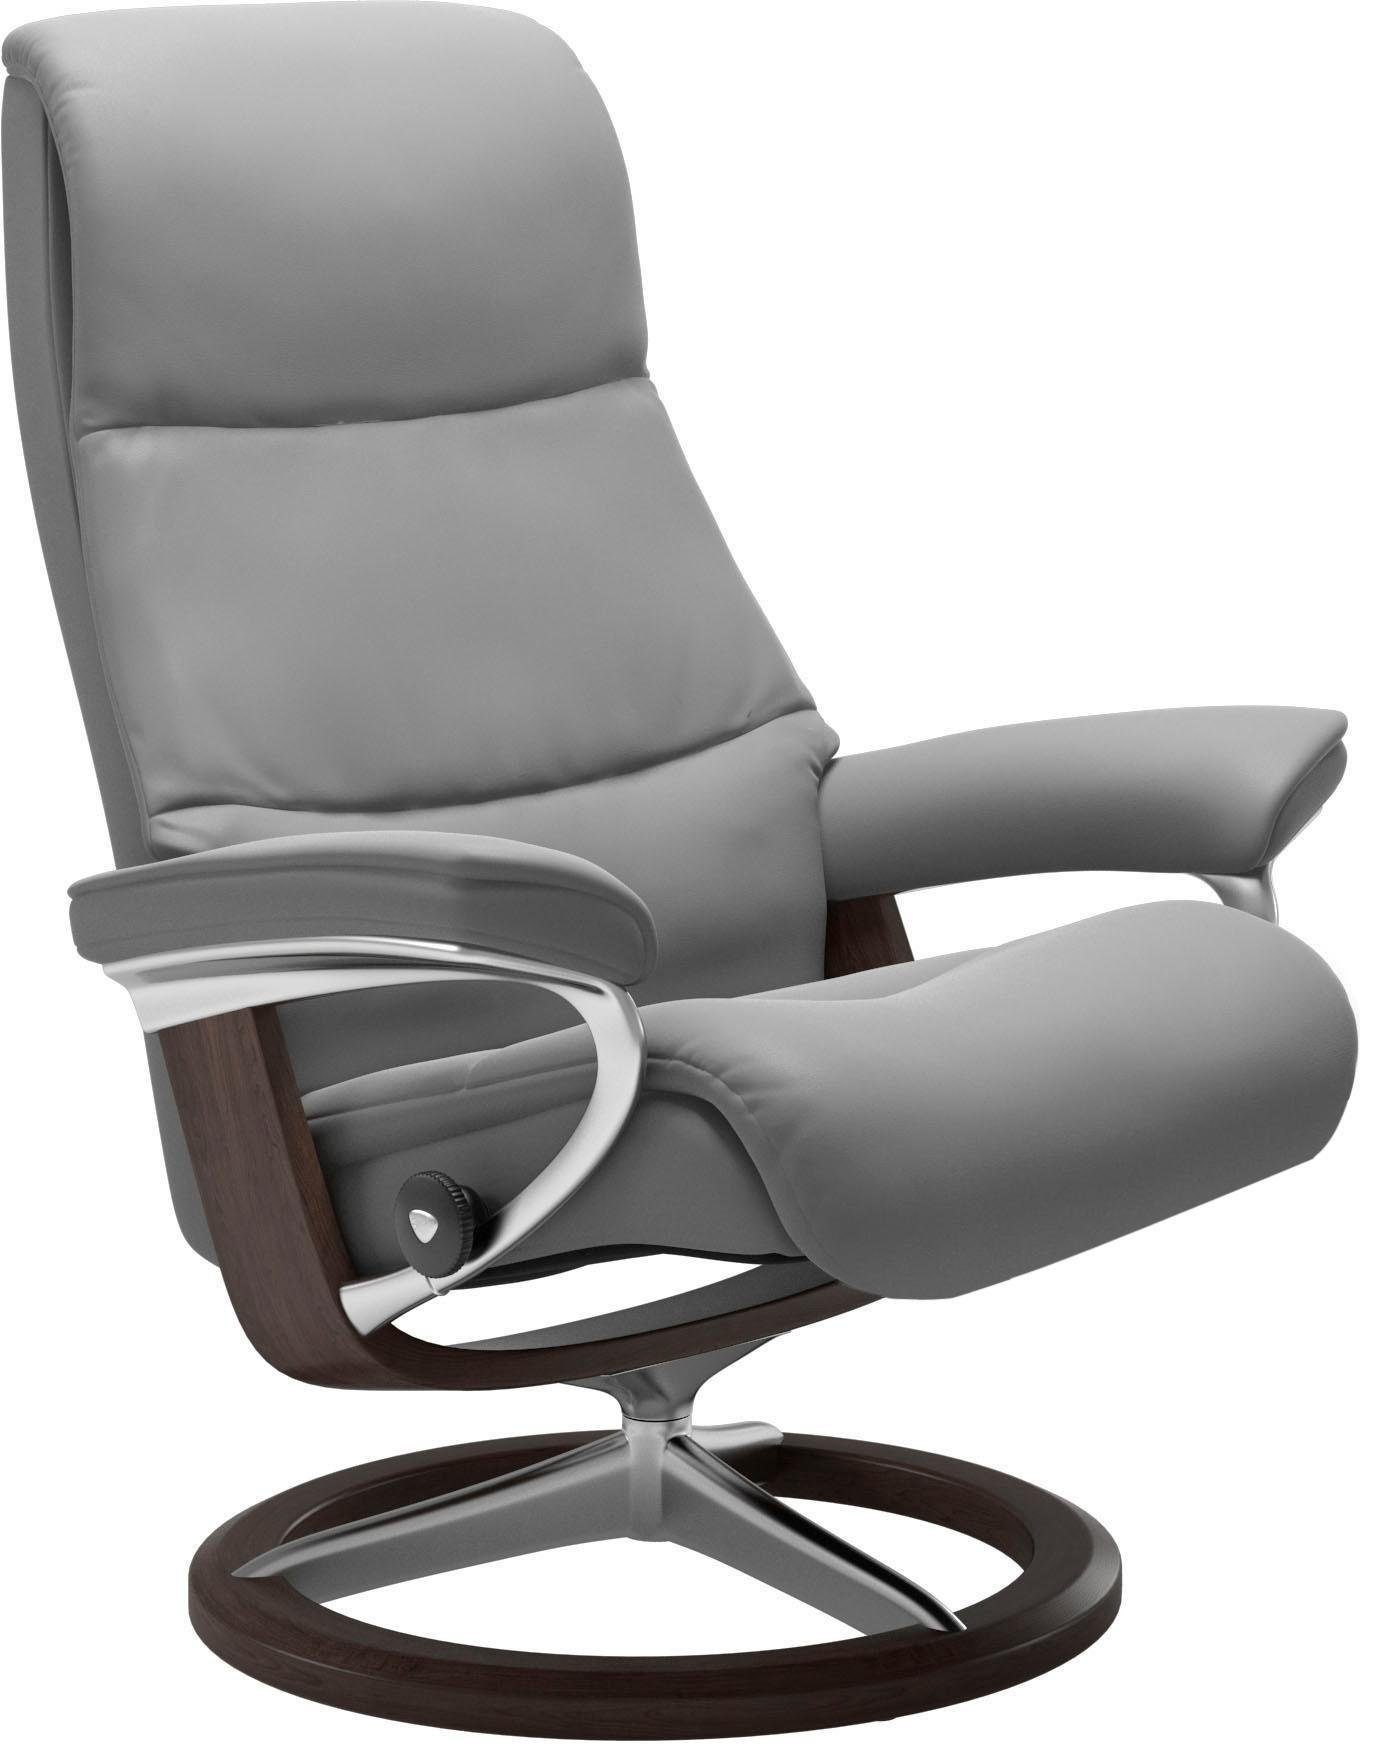 Stressless® Relaxsessel View, mit Base, Größe S,Gestell Signature Wenge